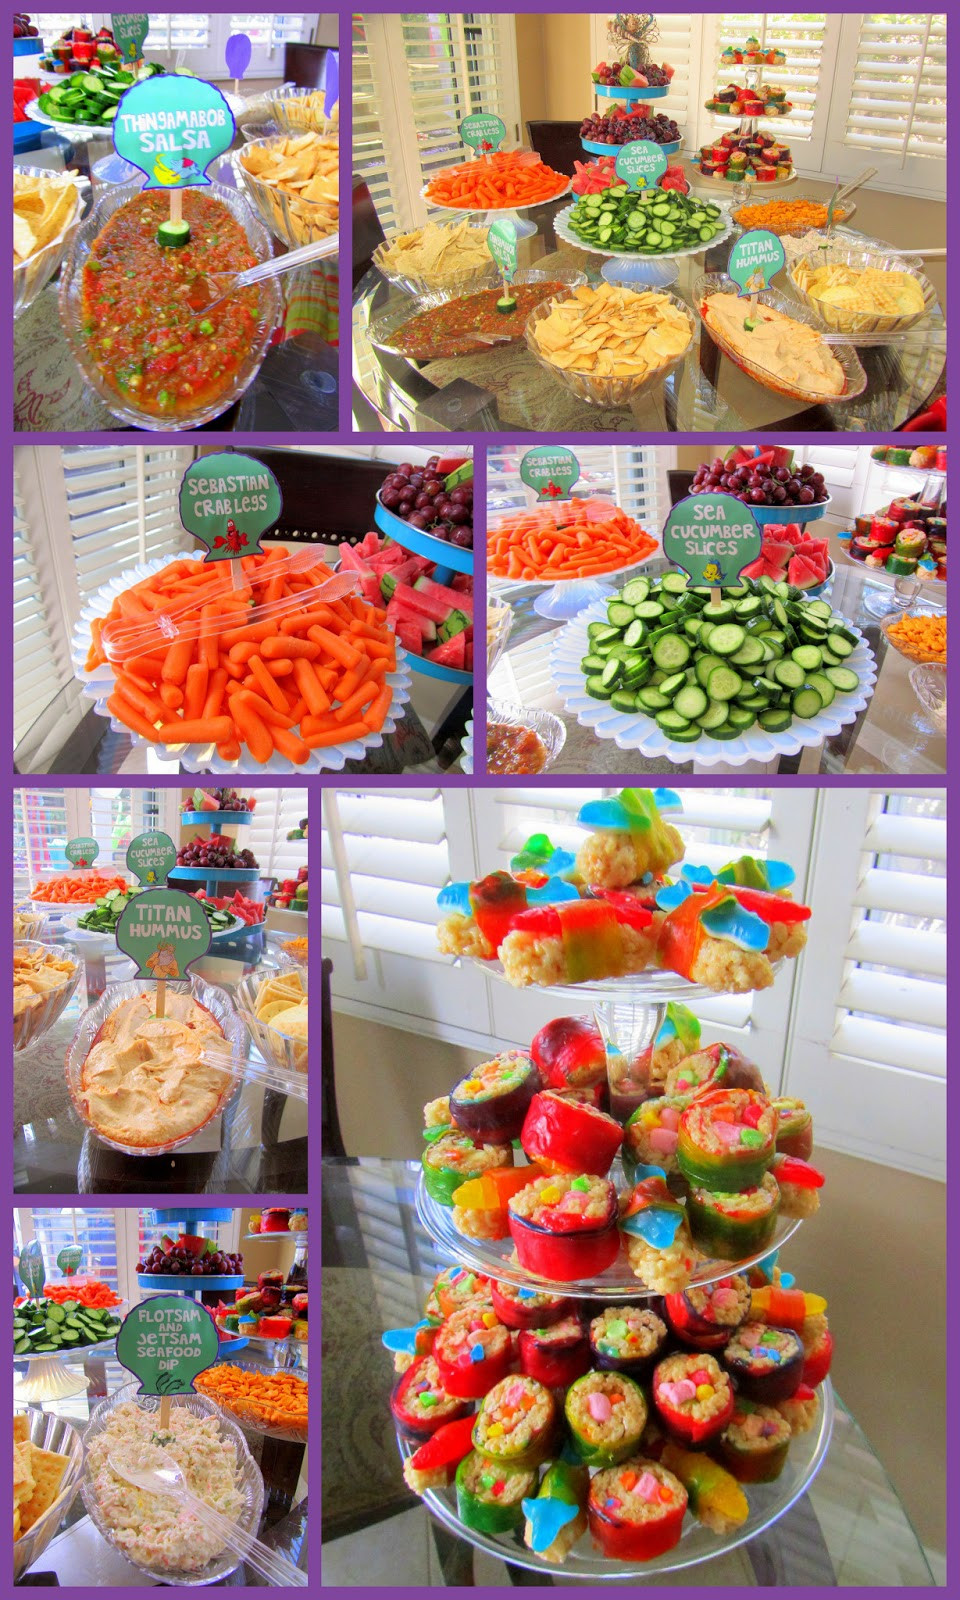 Mermaid Party Snack Ideas
 My Very PINTERESTing Project Under the Sea Mermaid Party